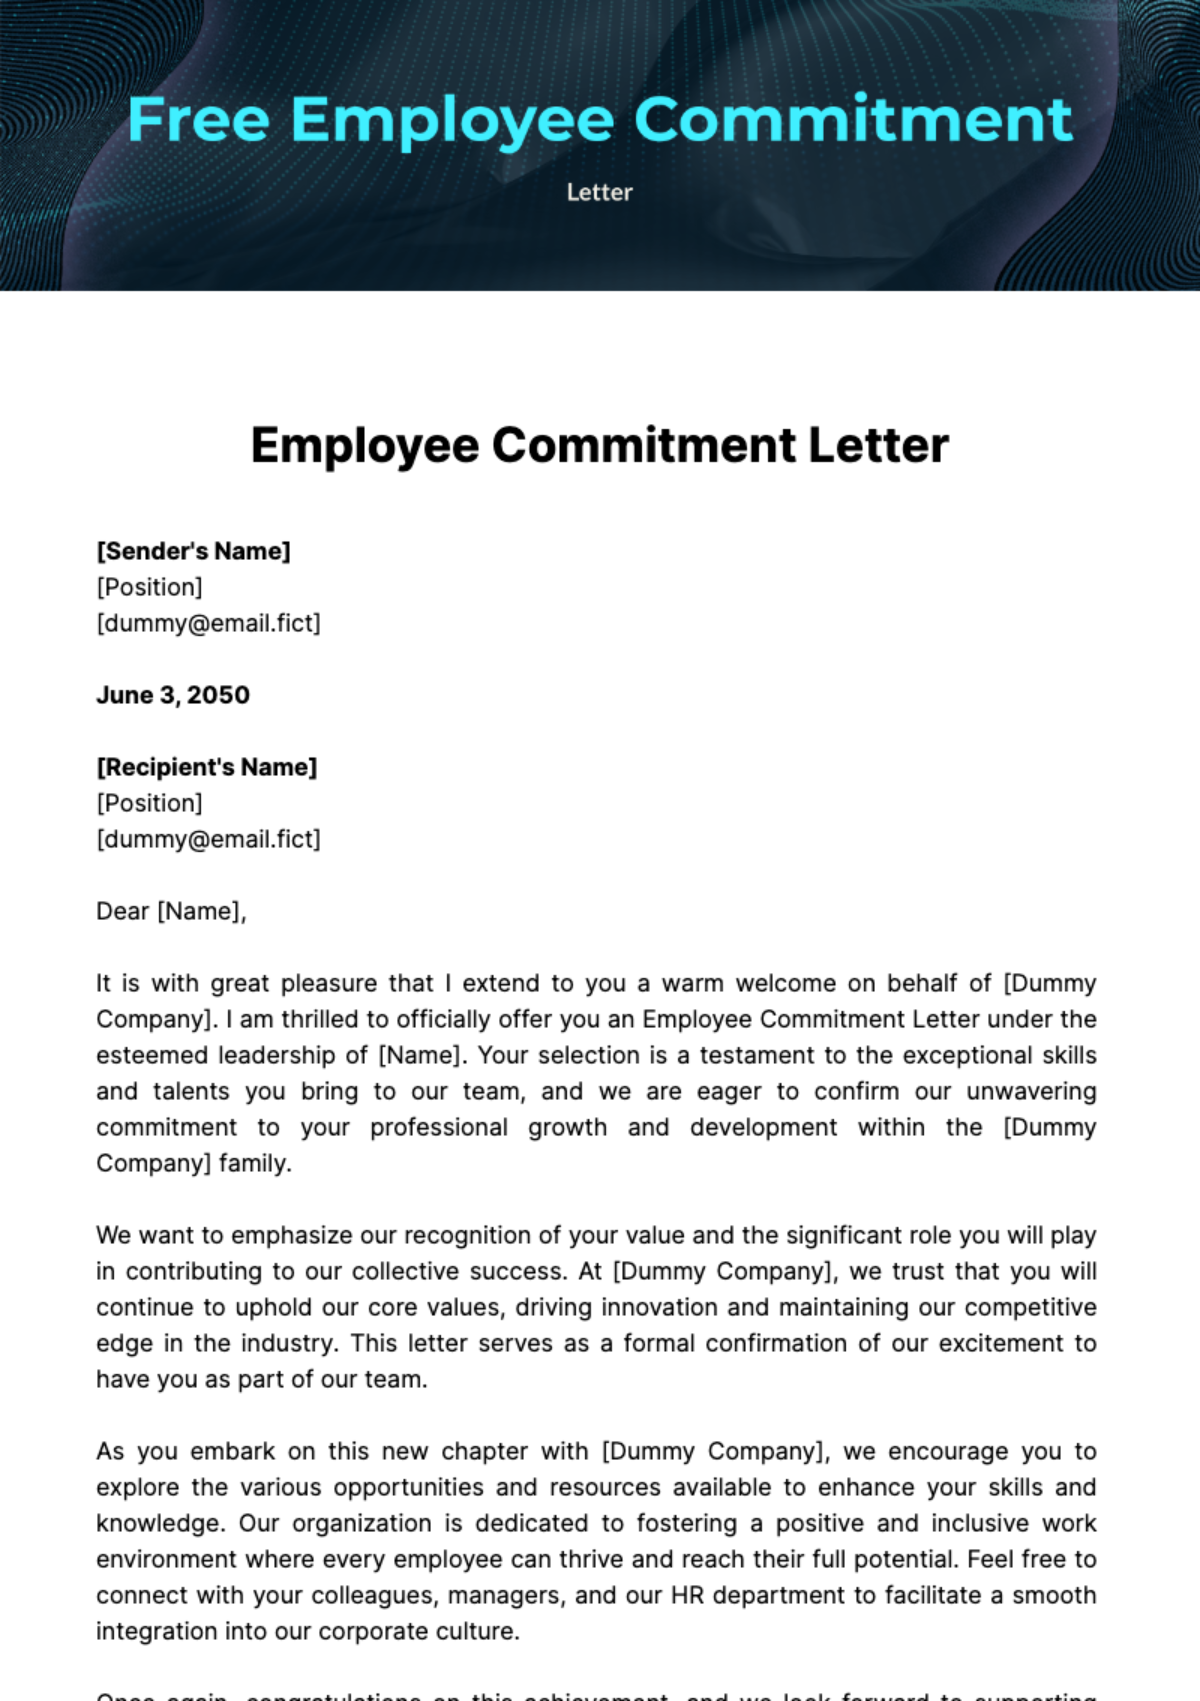 Employee Commitment Letter Template